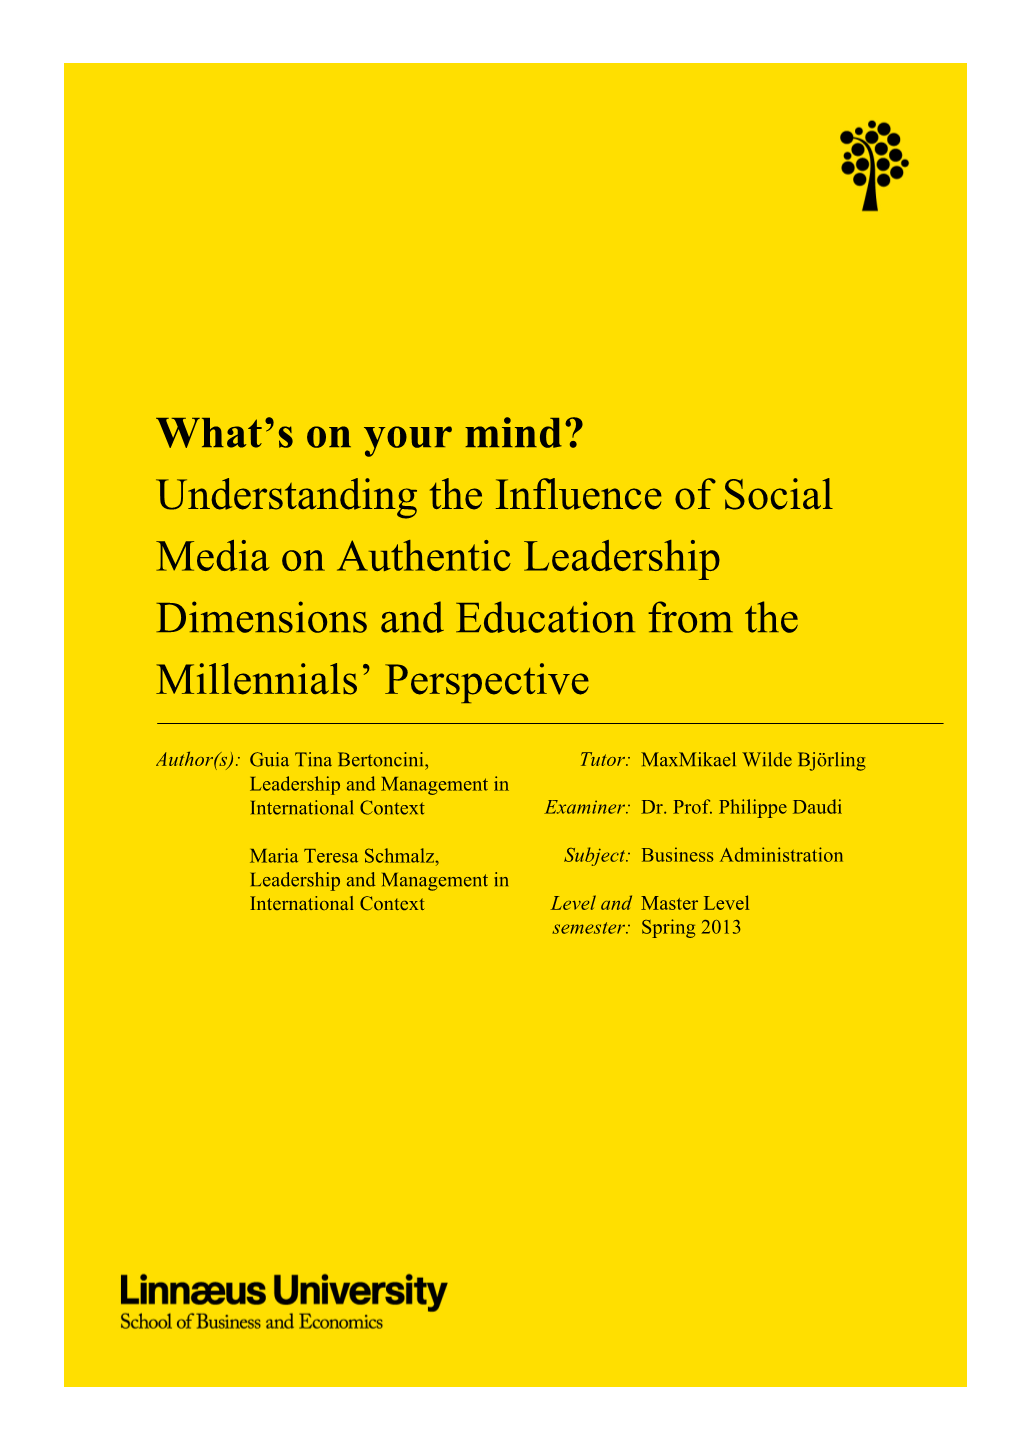 Understanding the Influence of Social Media on Authentic Leadership Dimensions and Education from the Millennials’ Perspective